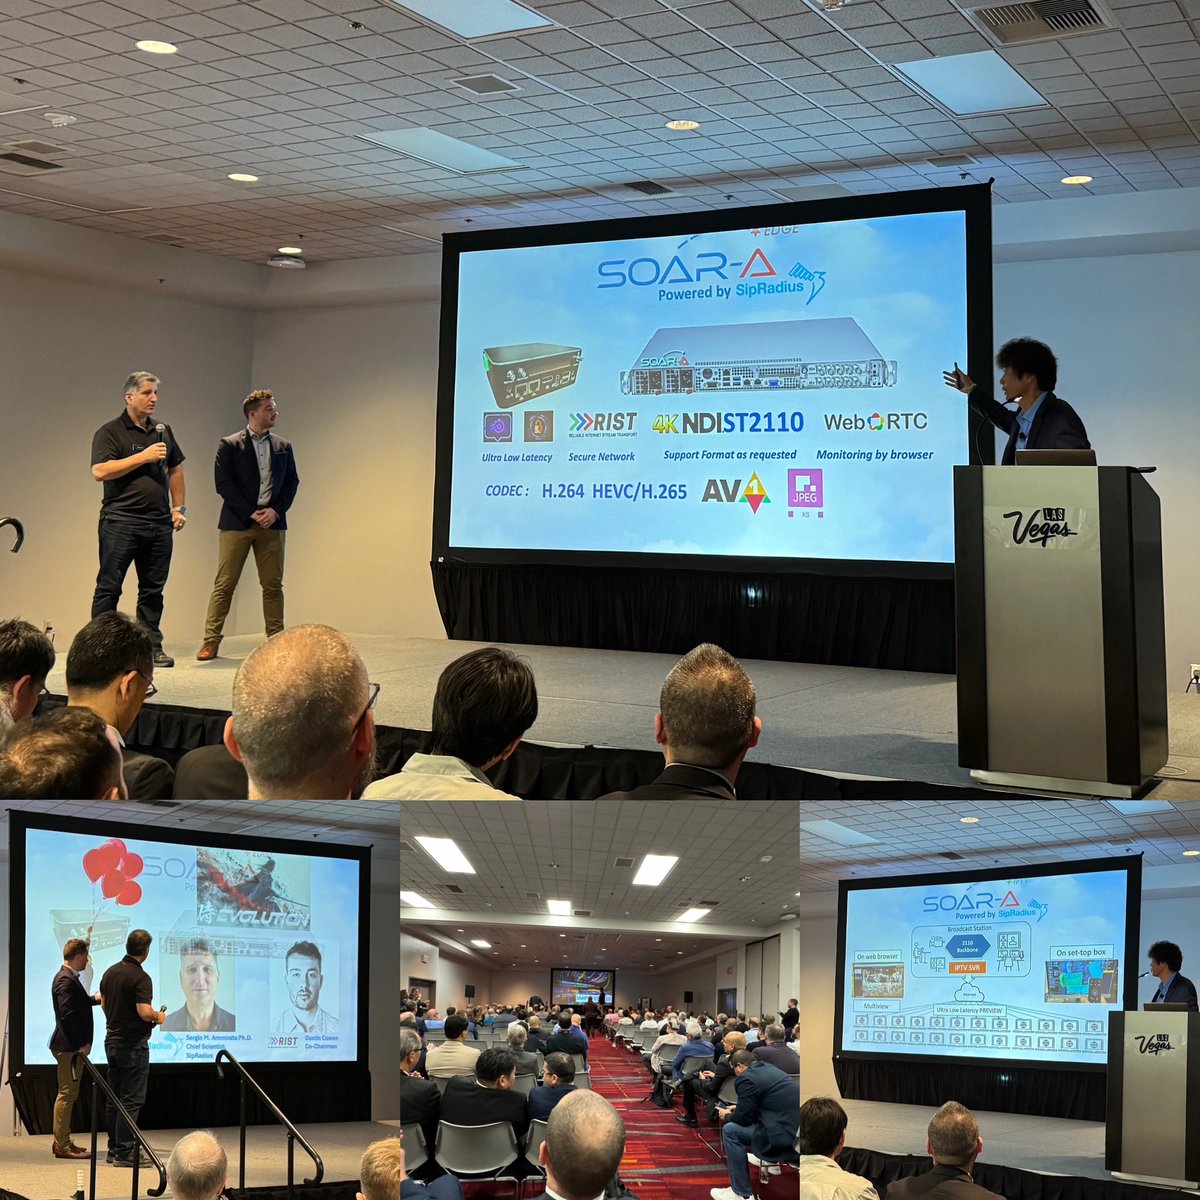 Great start to @NABShow with @foracorporation. To a packed audience, Sergio talked about the technology partnership #SOARA & Dustin explained @RISTForum.

Looking forward to doing demos on  #IP #ultralowlatency #encoders  #security & #mediaprocessing on the FOR-A booth #nabshow.